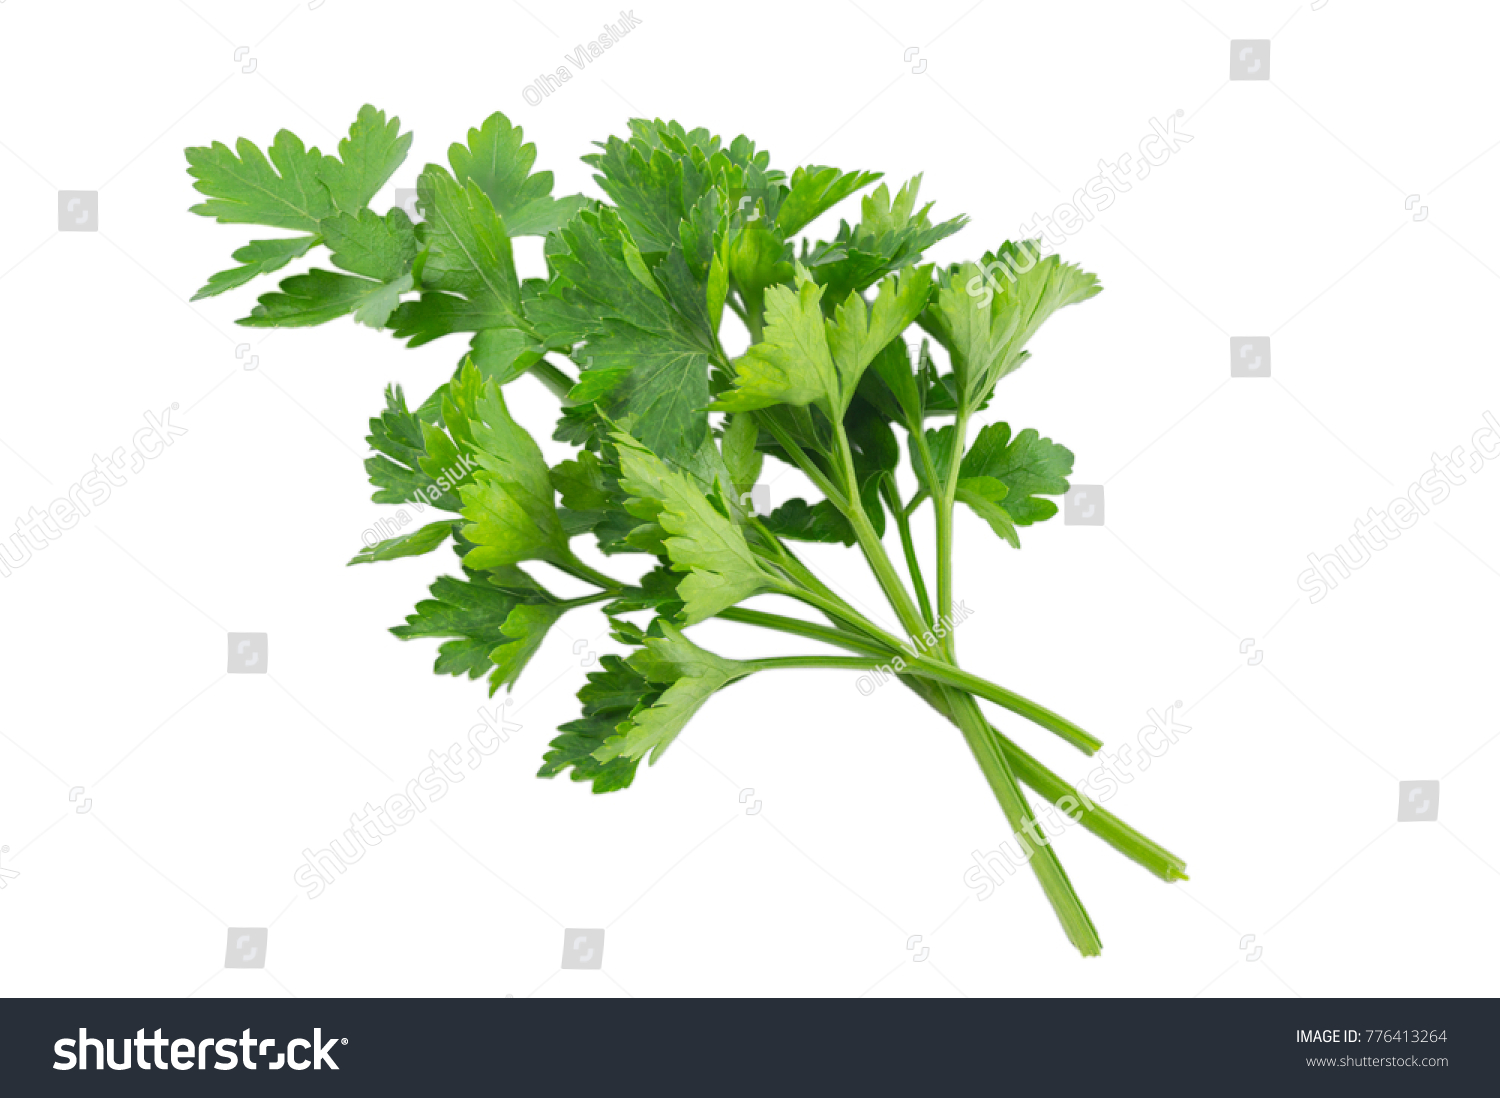 Parsley isolated on a white background with a clipping path #776413264